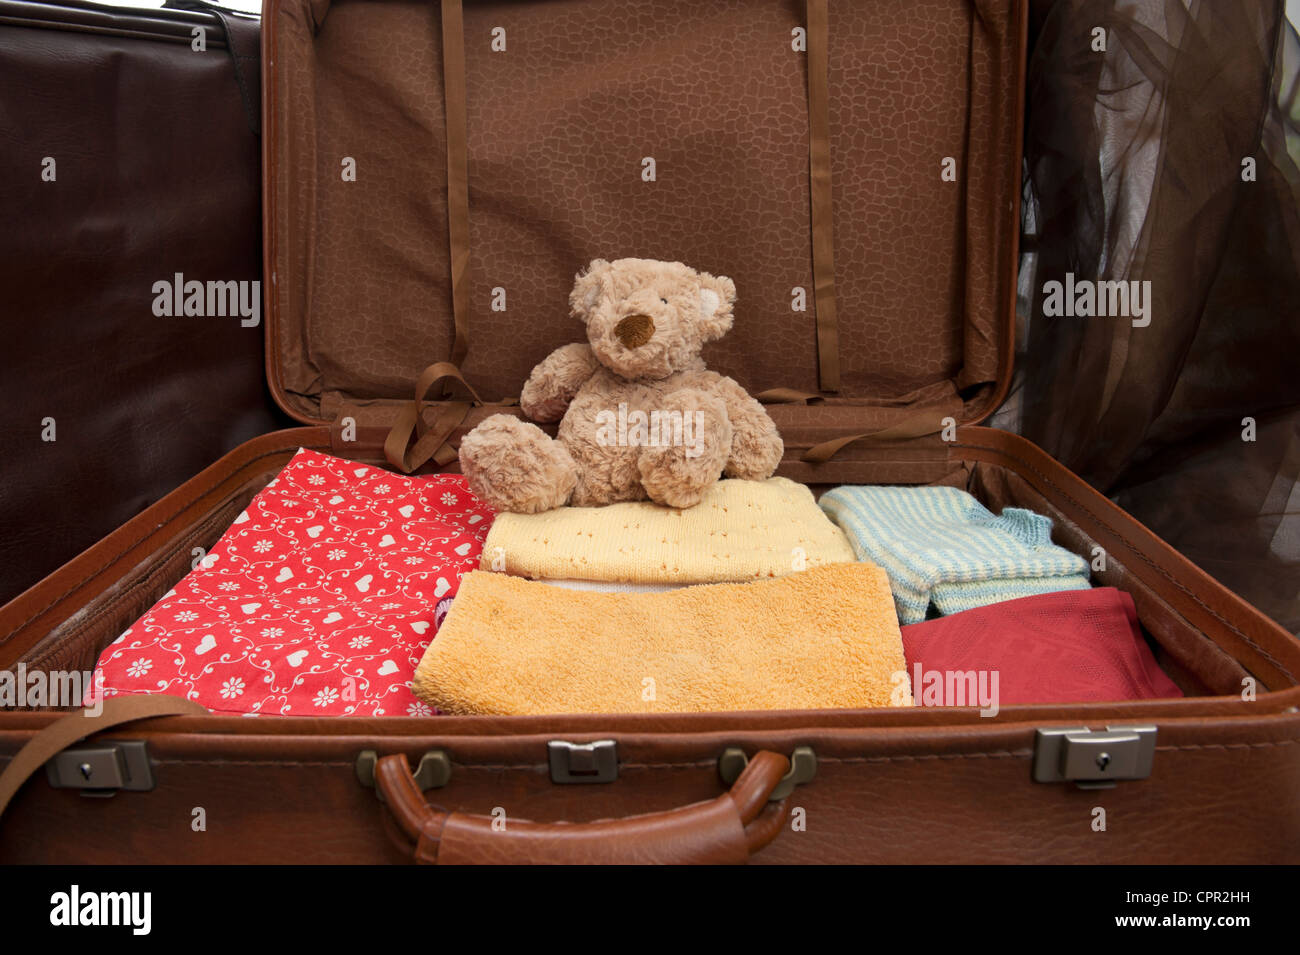 Open suitcase with clothes and teddy bear Stock Photo